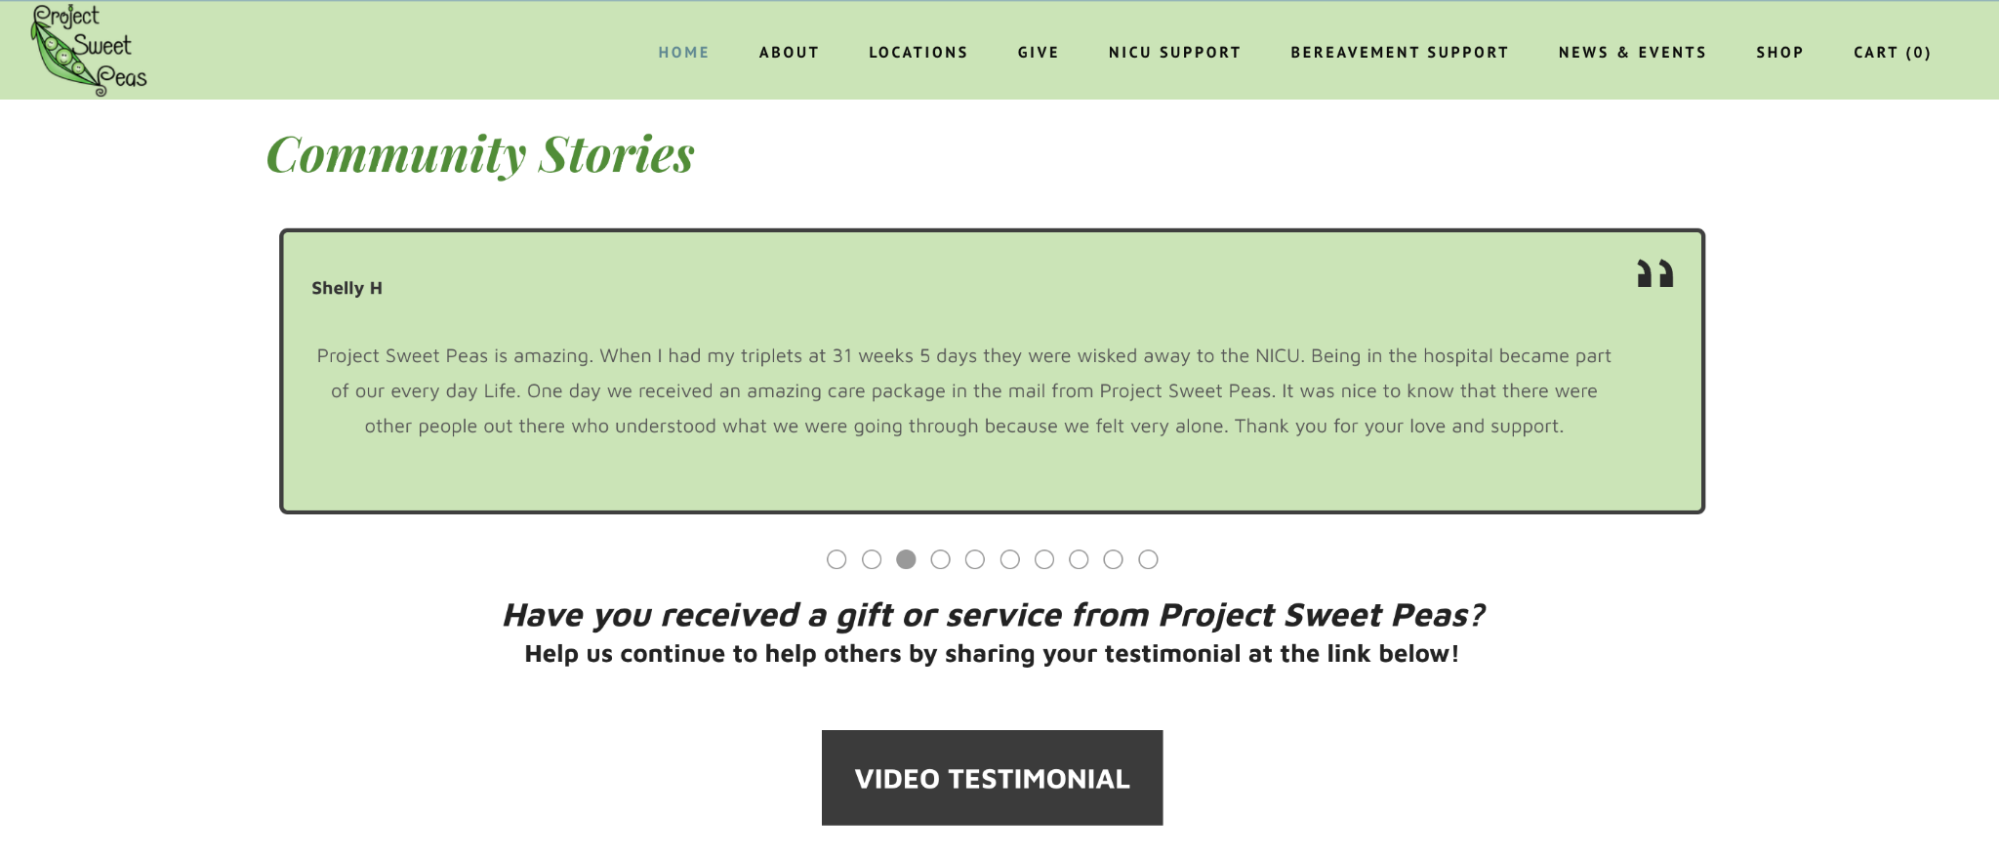 Project Sweet Peas beneficiary testimonial